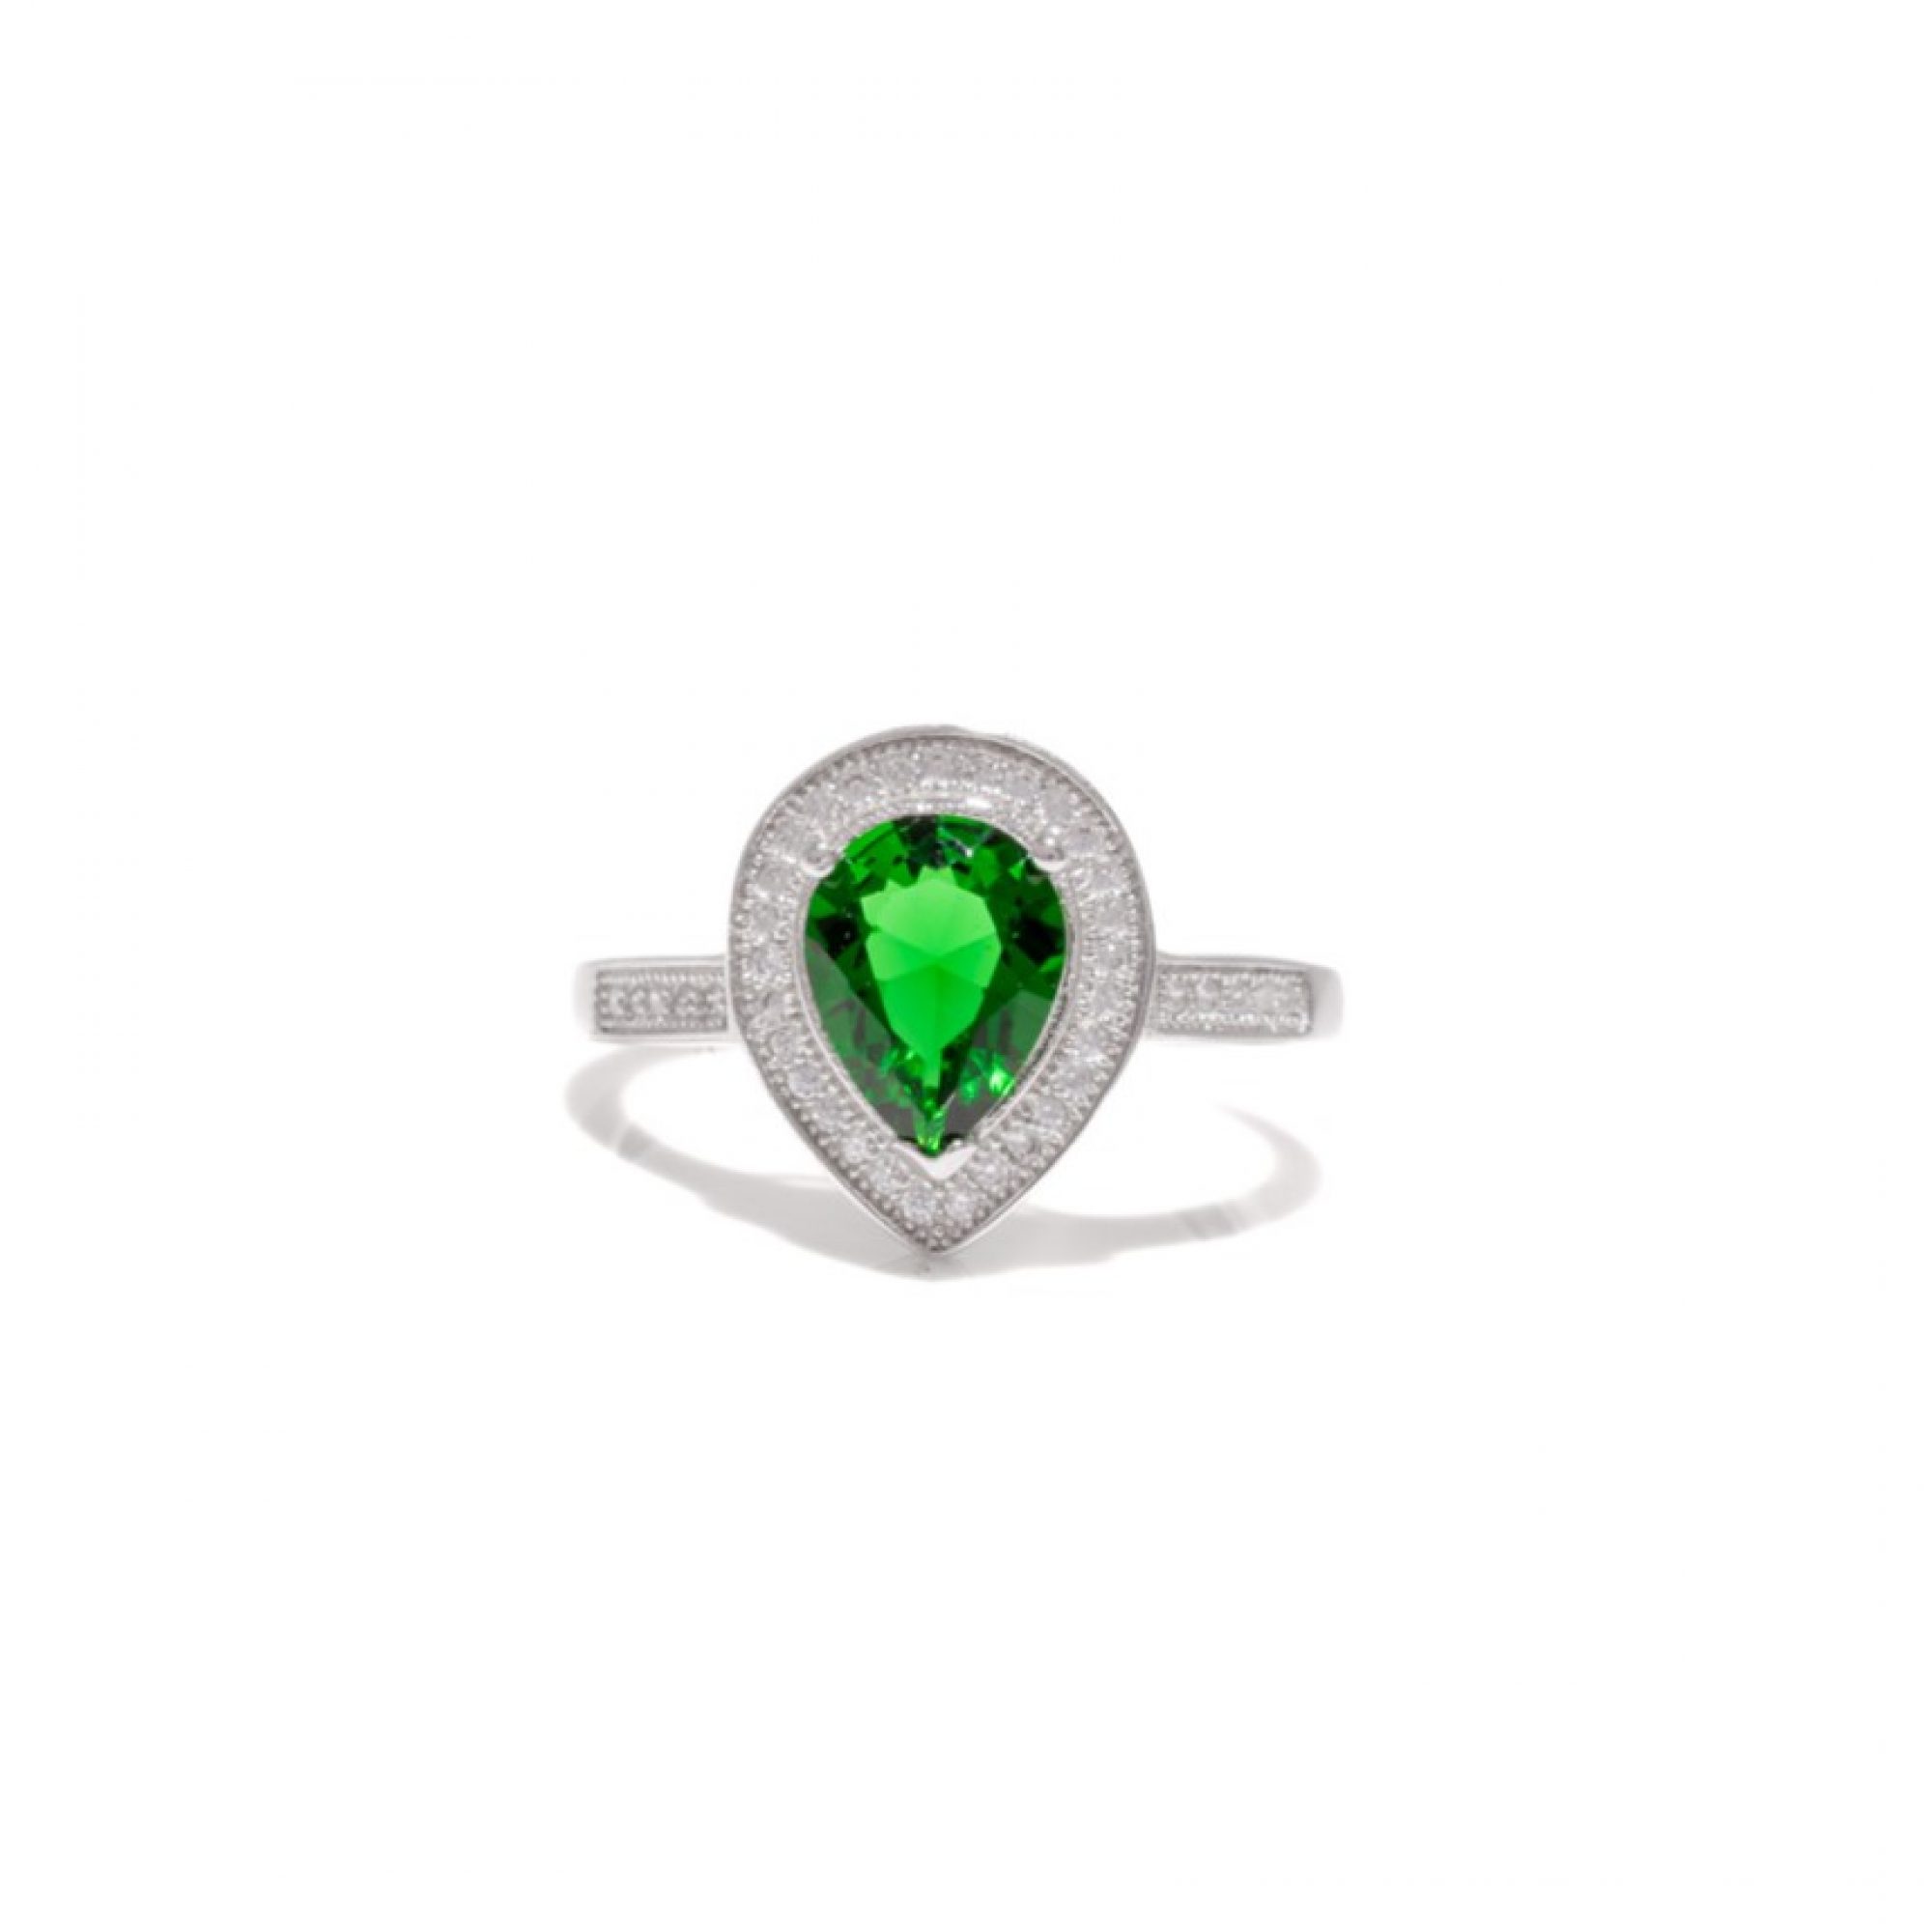 Ring with emerald and zircon stones